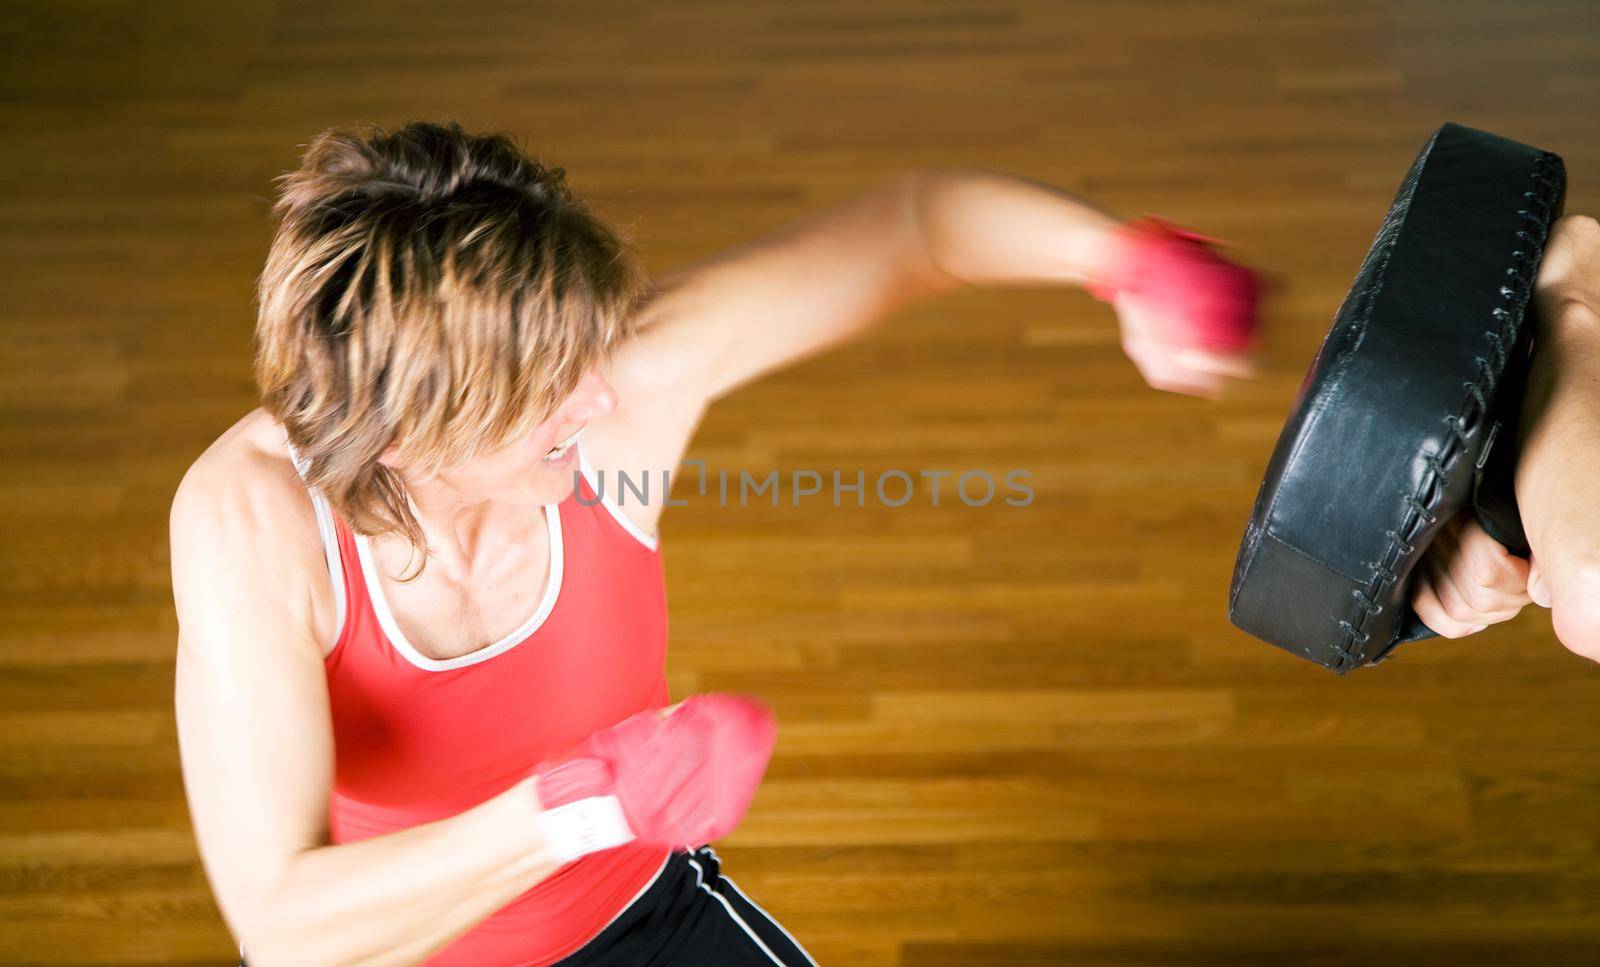 Sparring session in marital arts (very dynamic picture – motion blur!), woman punching with her fist